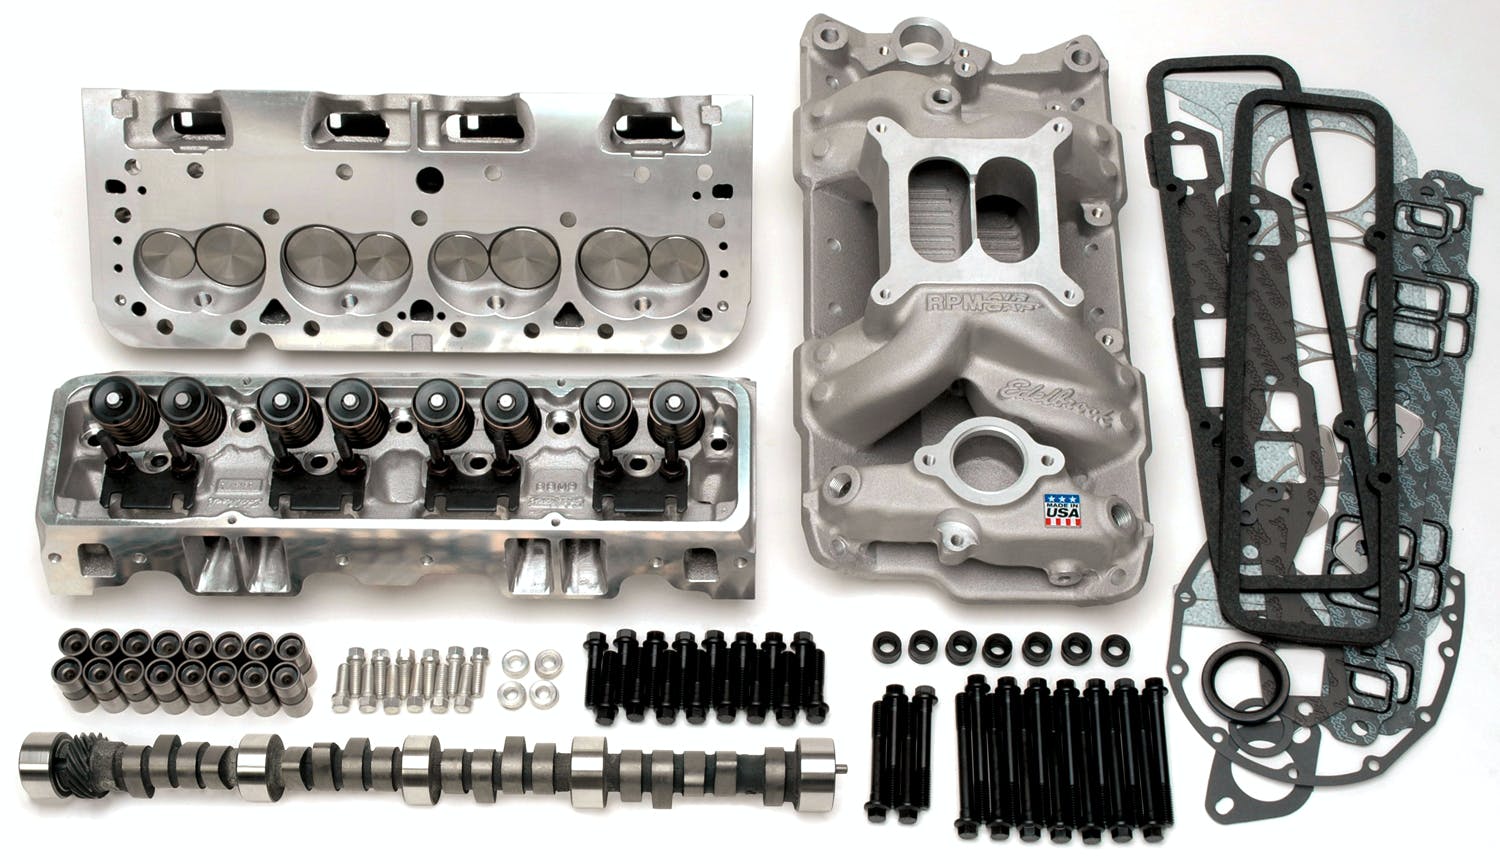 Edelbrock 2098 Performer RPM Top End Kit for S/B Chevy